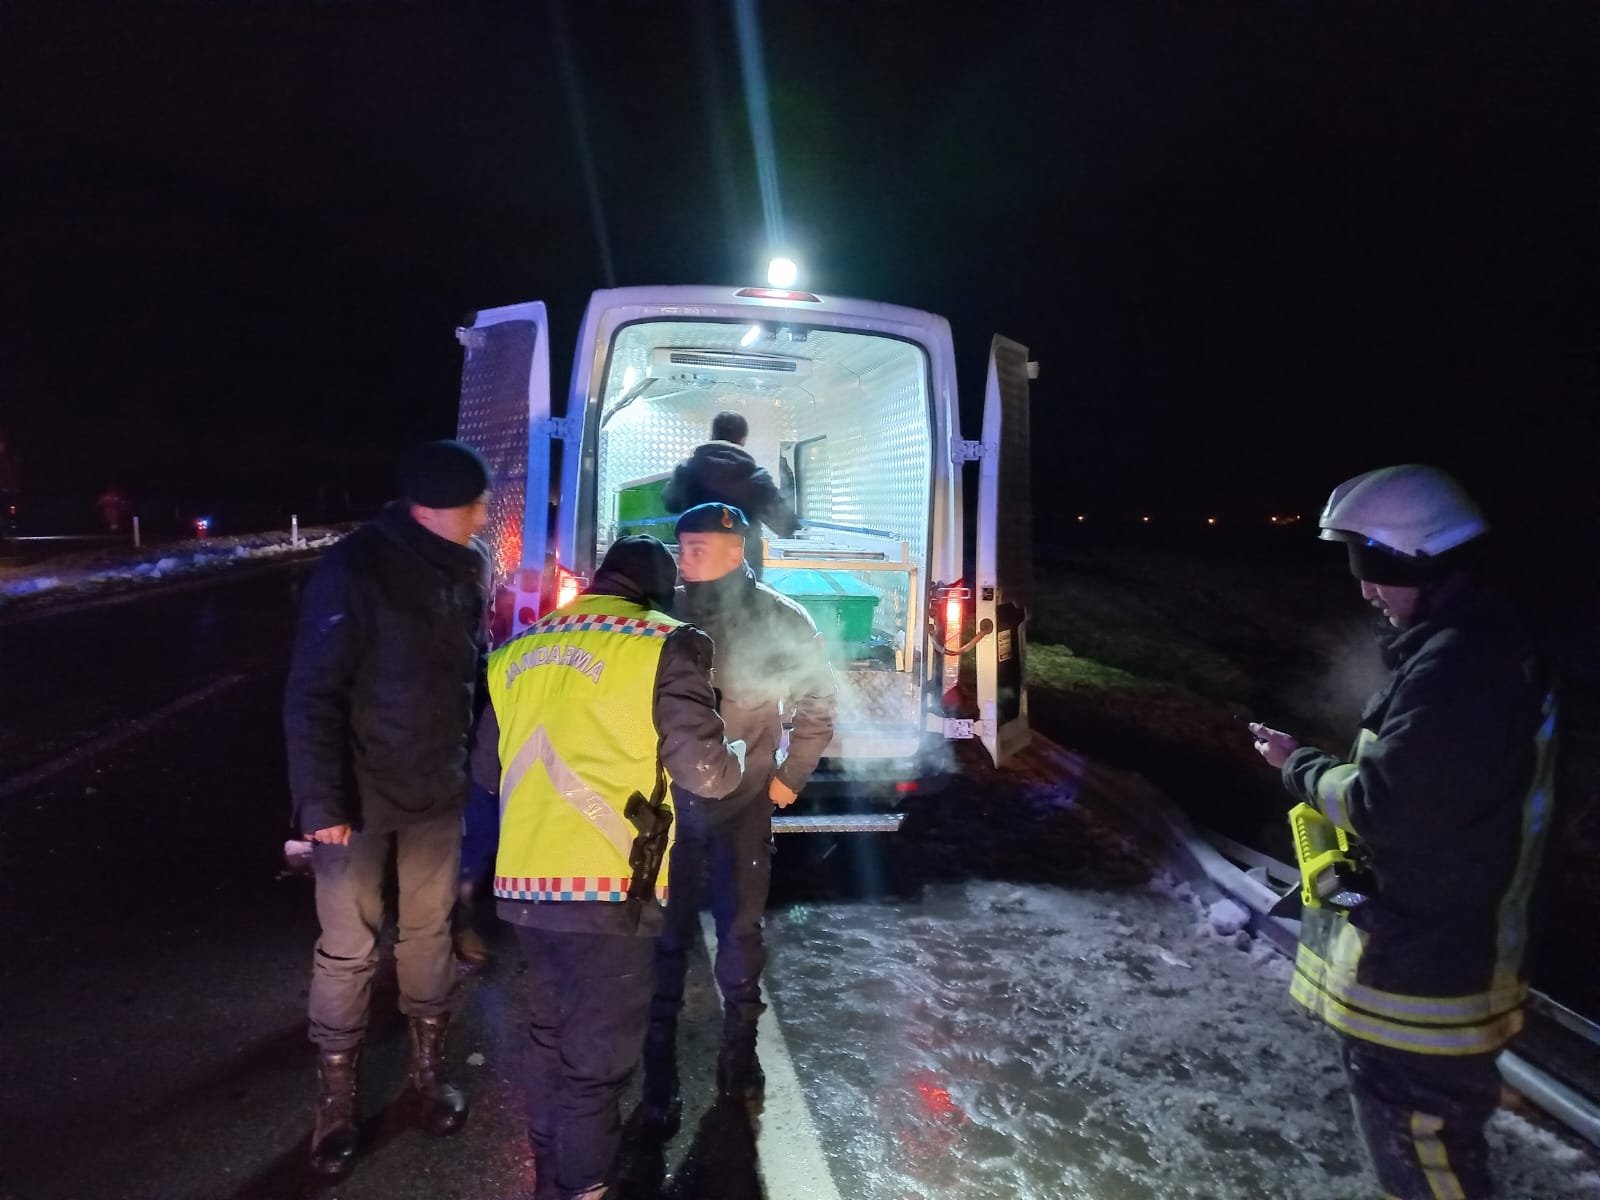 The ambulance and gendarmerie teams are seen after the bus accident in Kayseri, Türkiye, Jan. 29, 2023. (DHA Photo)